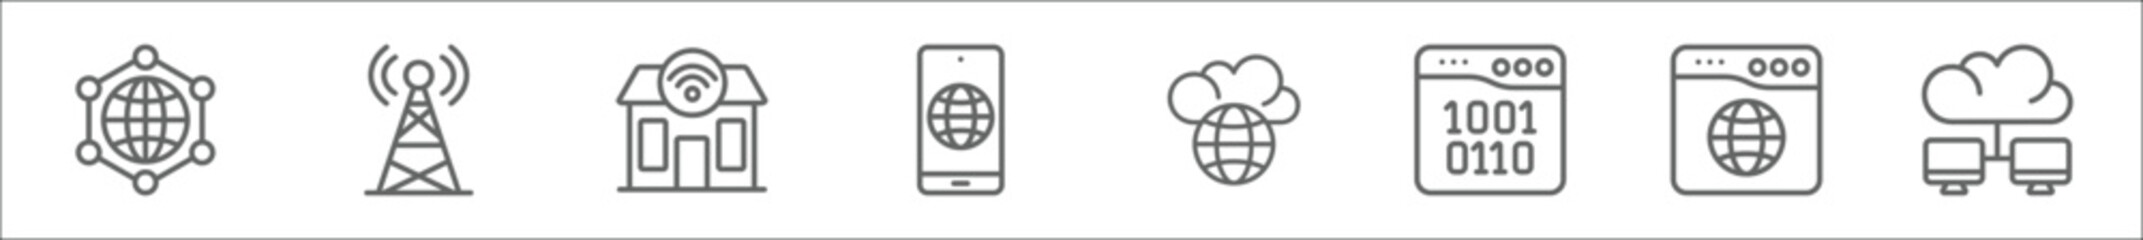 outline set of networking line icons. linear vector icons such as internet, antenna, smart home, conneciton, cloud, binary code, browser, cloud